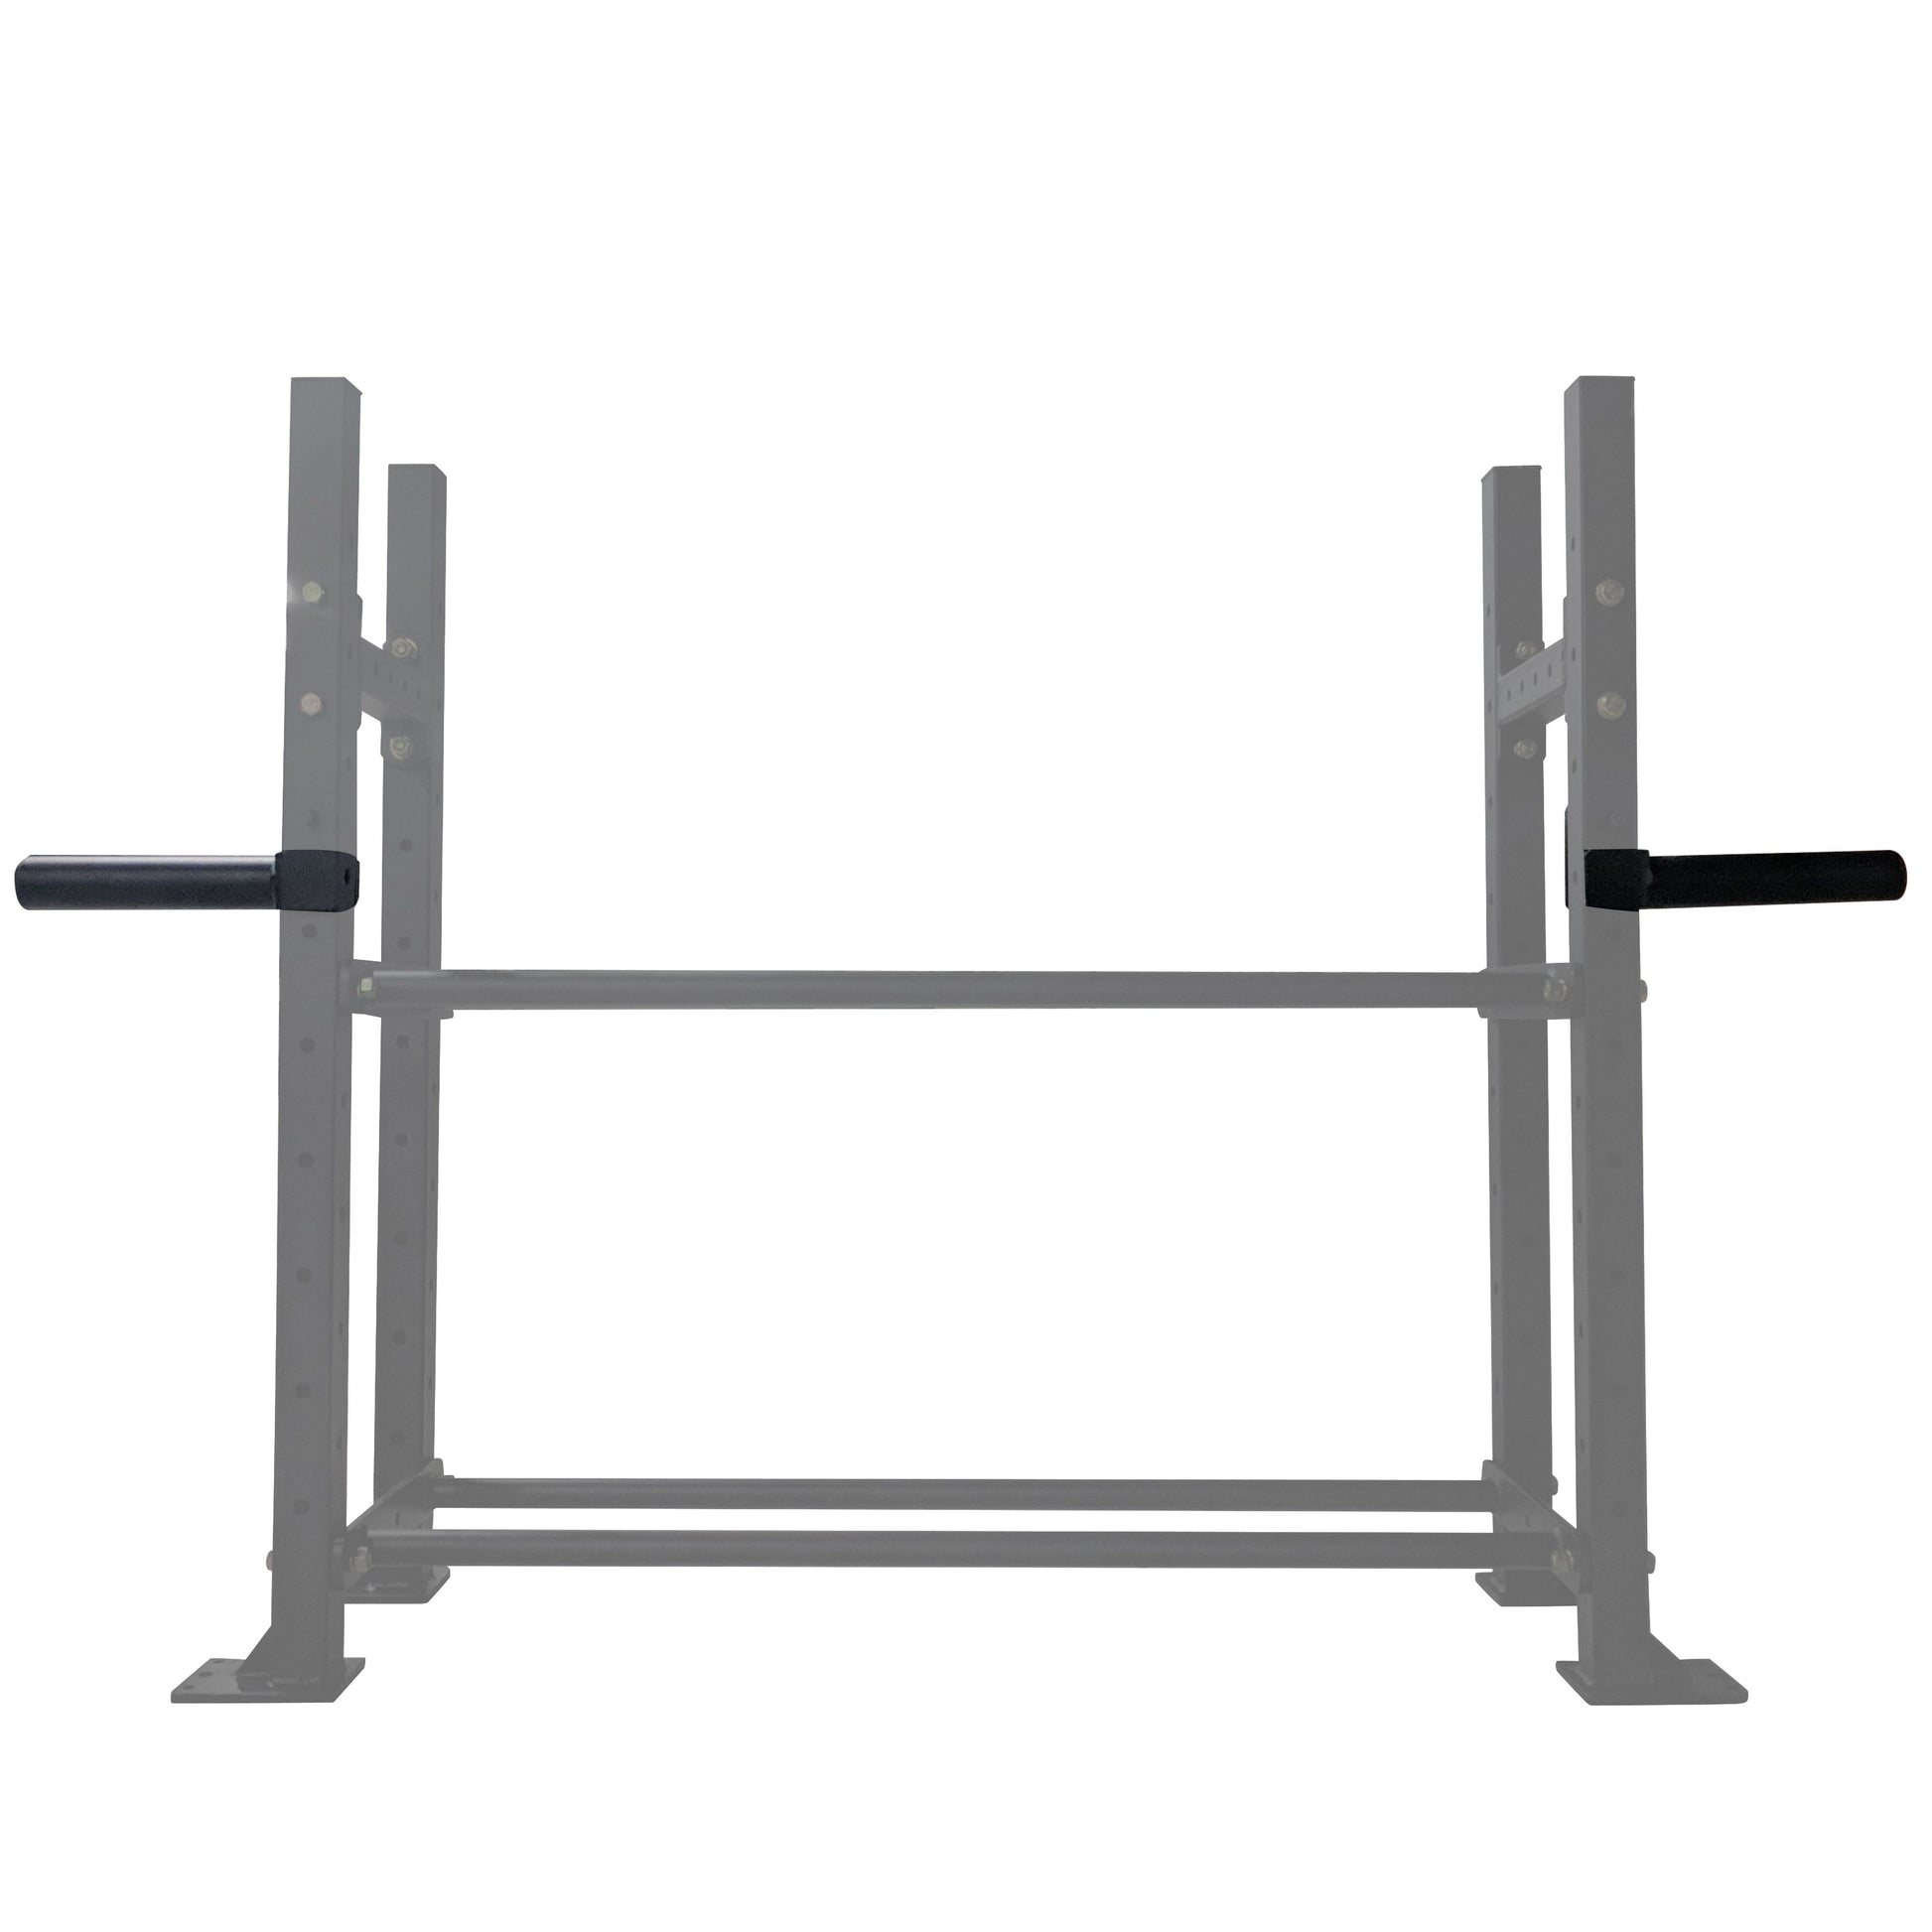 Weight Plate Holders for Mass Storage System